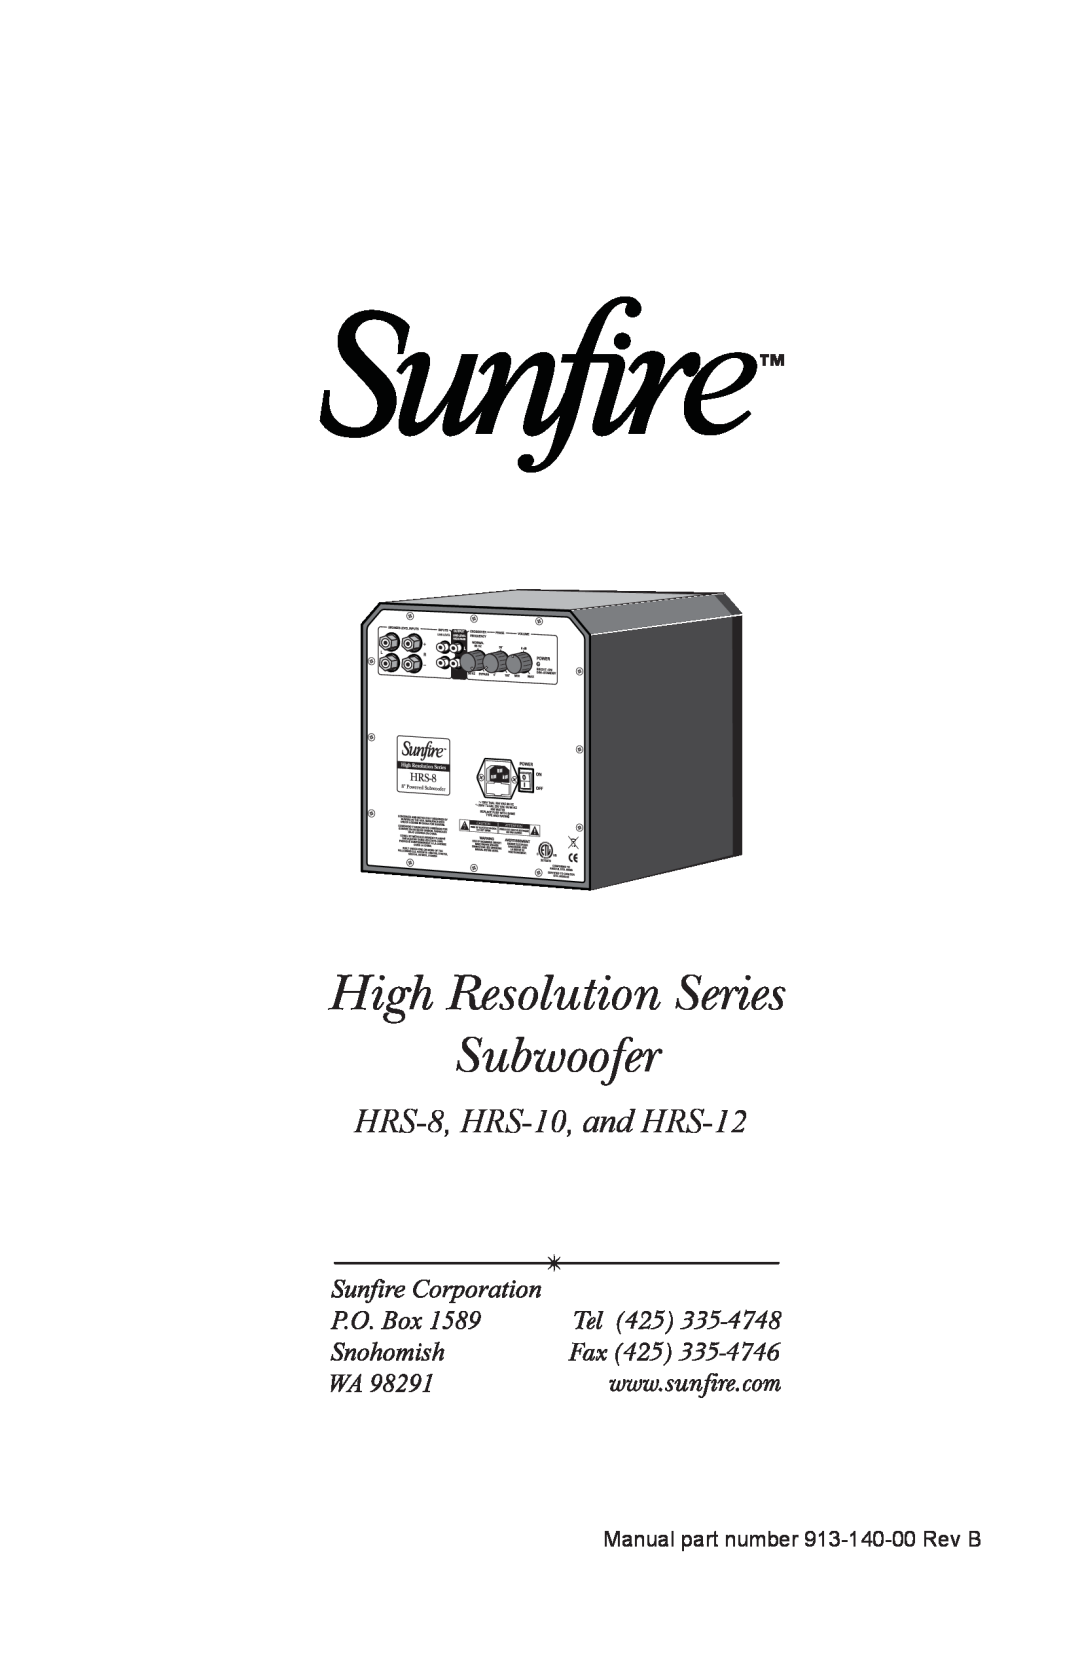 Sunfire user manual High Resolution Series Subwoofer, HRS-8, HRS-10, and HRS-12 